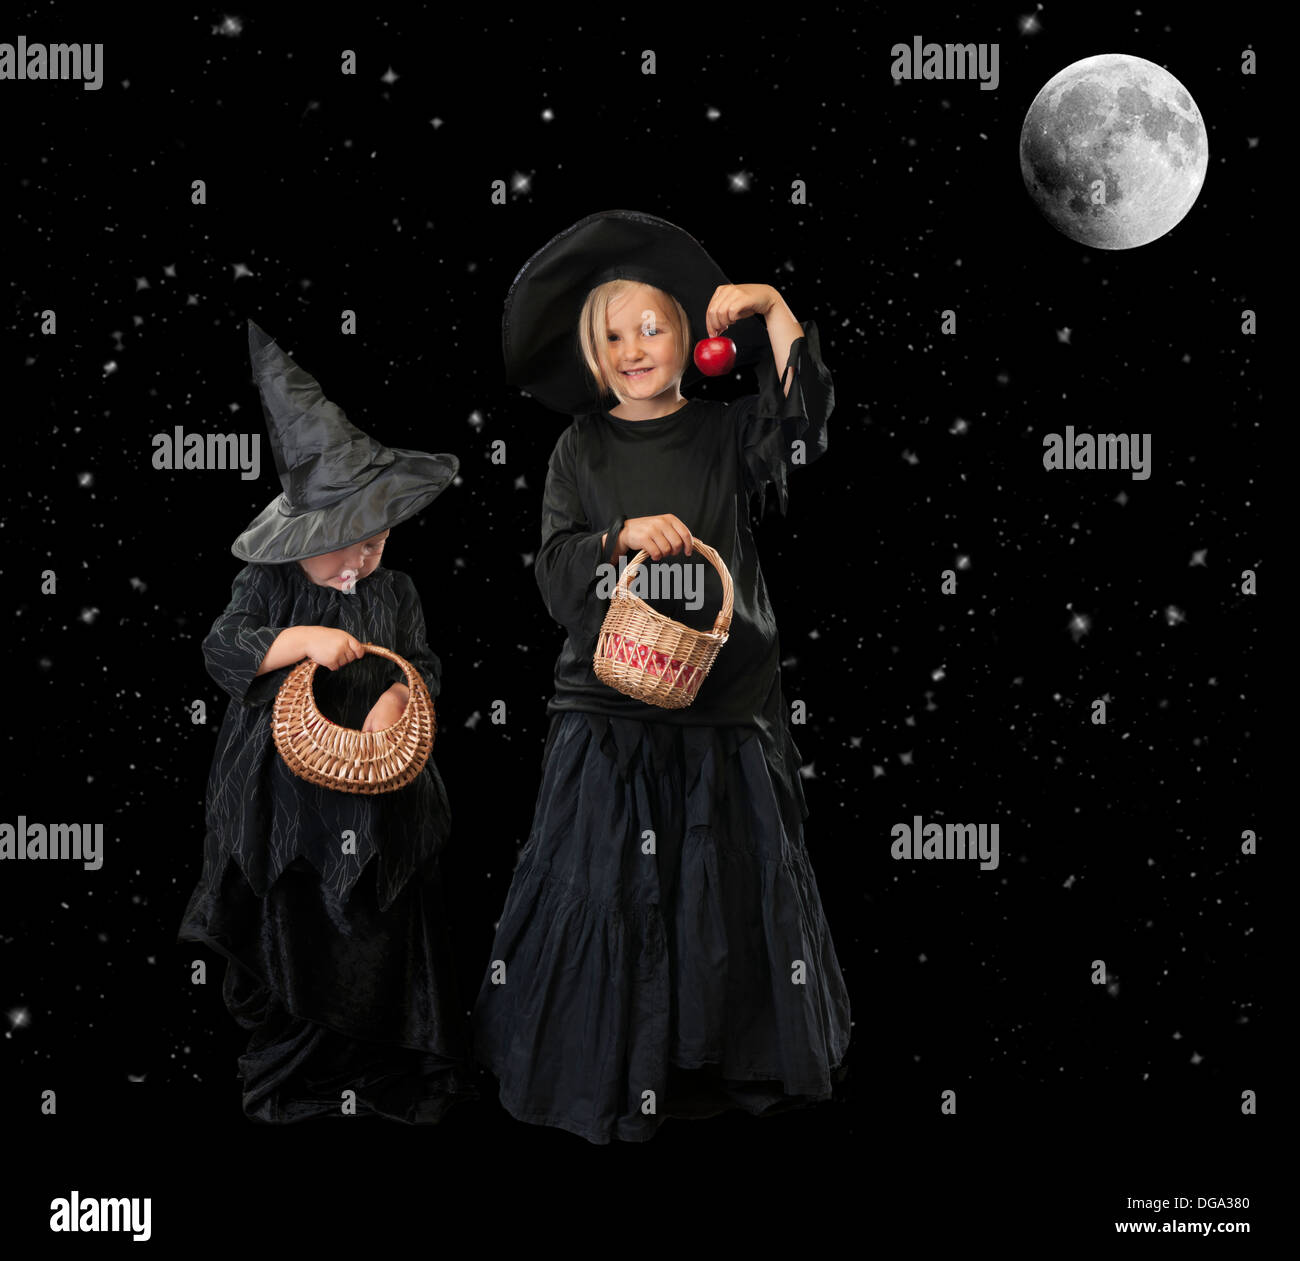 two little halloween witches, background with stars and moon Stock Photo